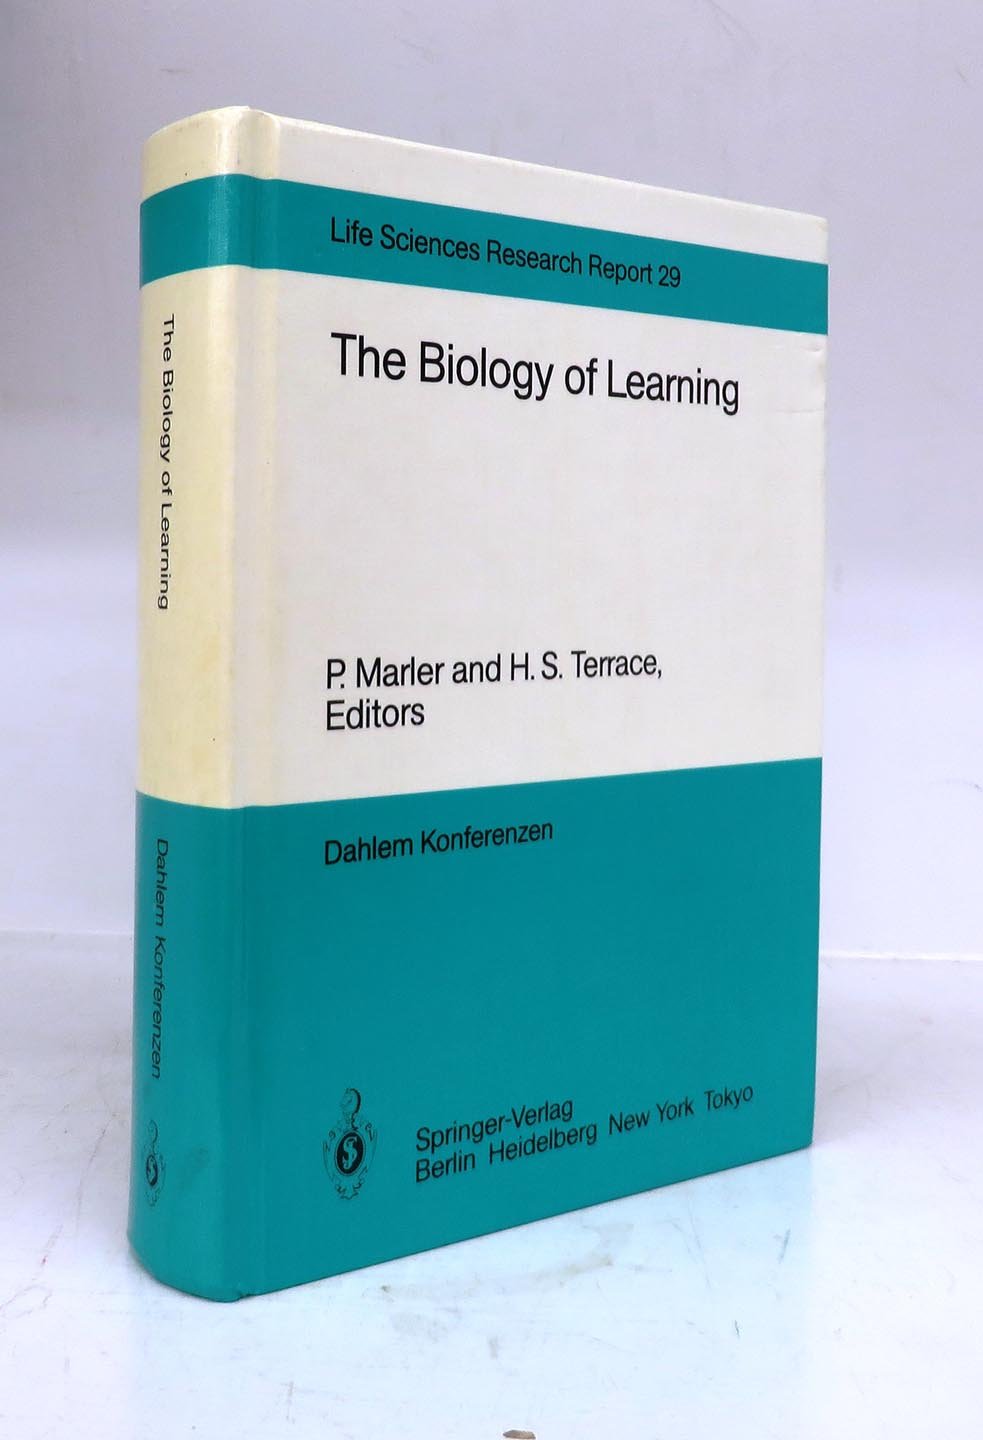 The Biology of Learning: Report of the Dahlem Workshop on the Biology of Learning, Berlin, 1983 October 23-28.